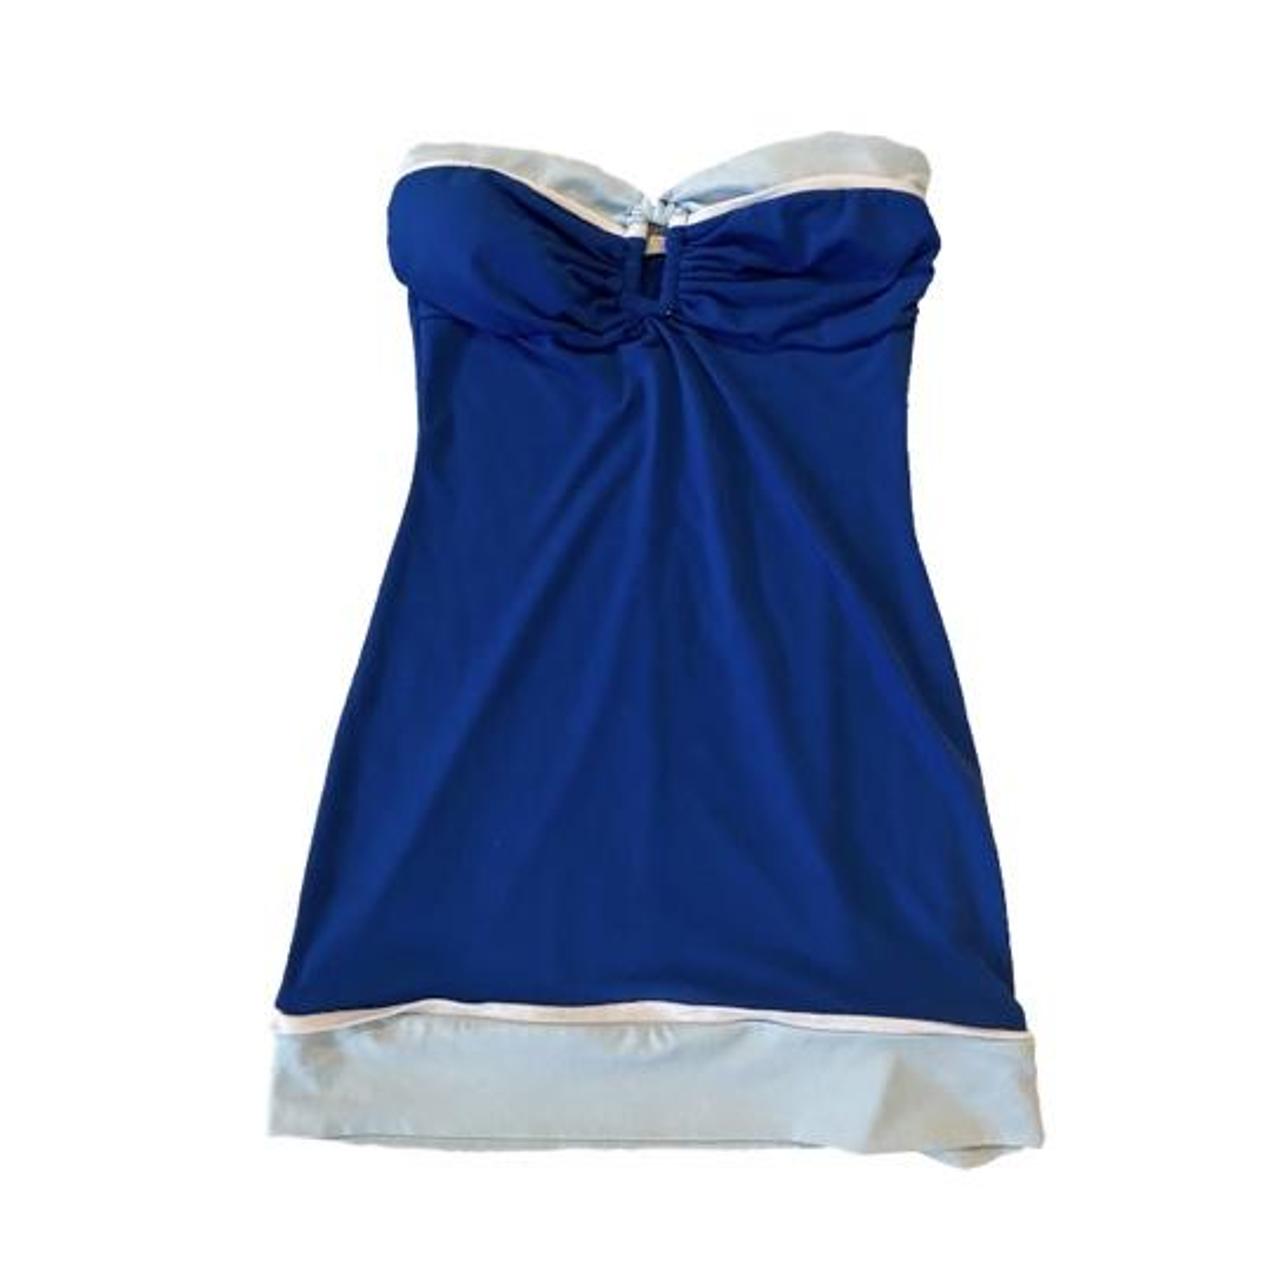 Frederick's of Hollywood Women's Blue Dress